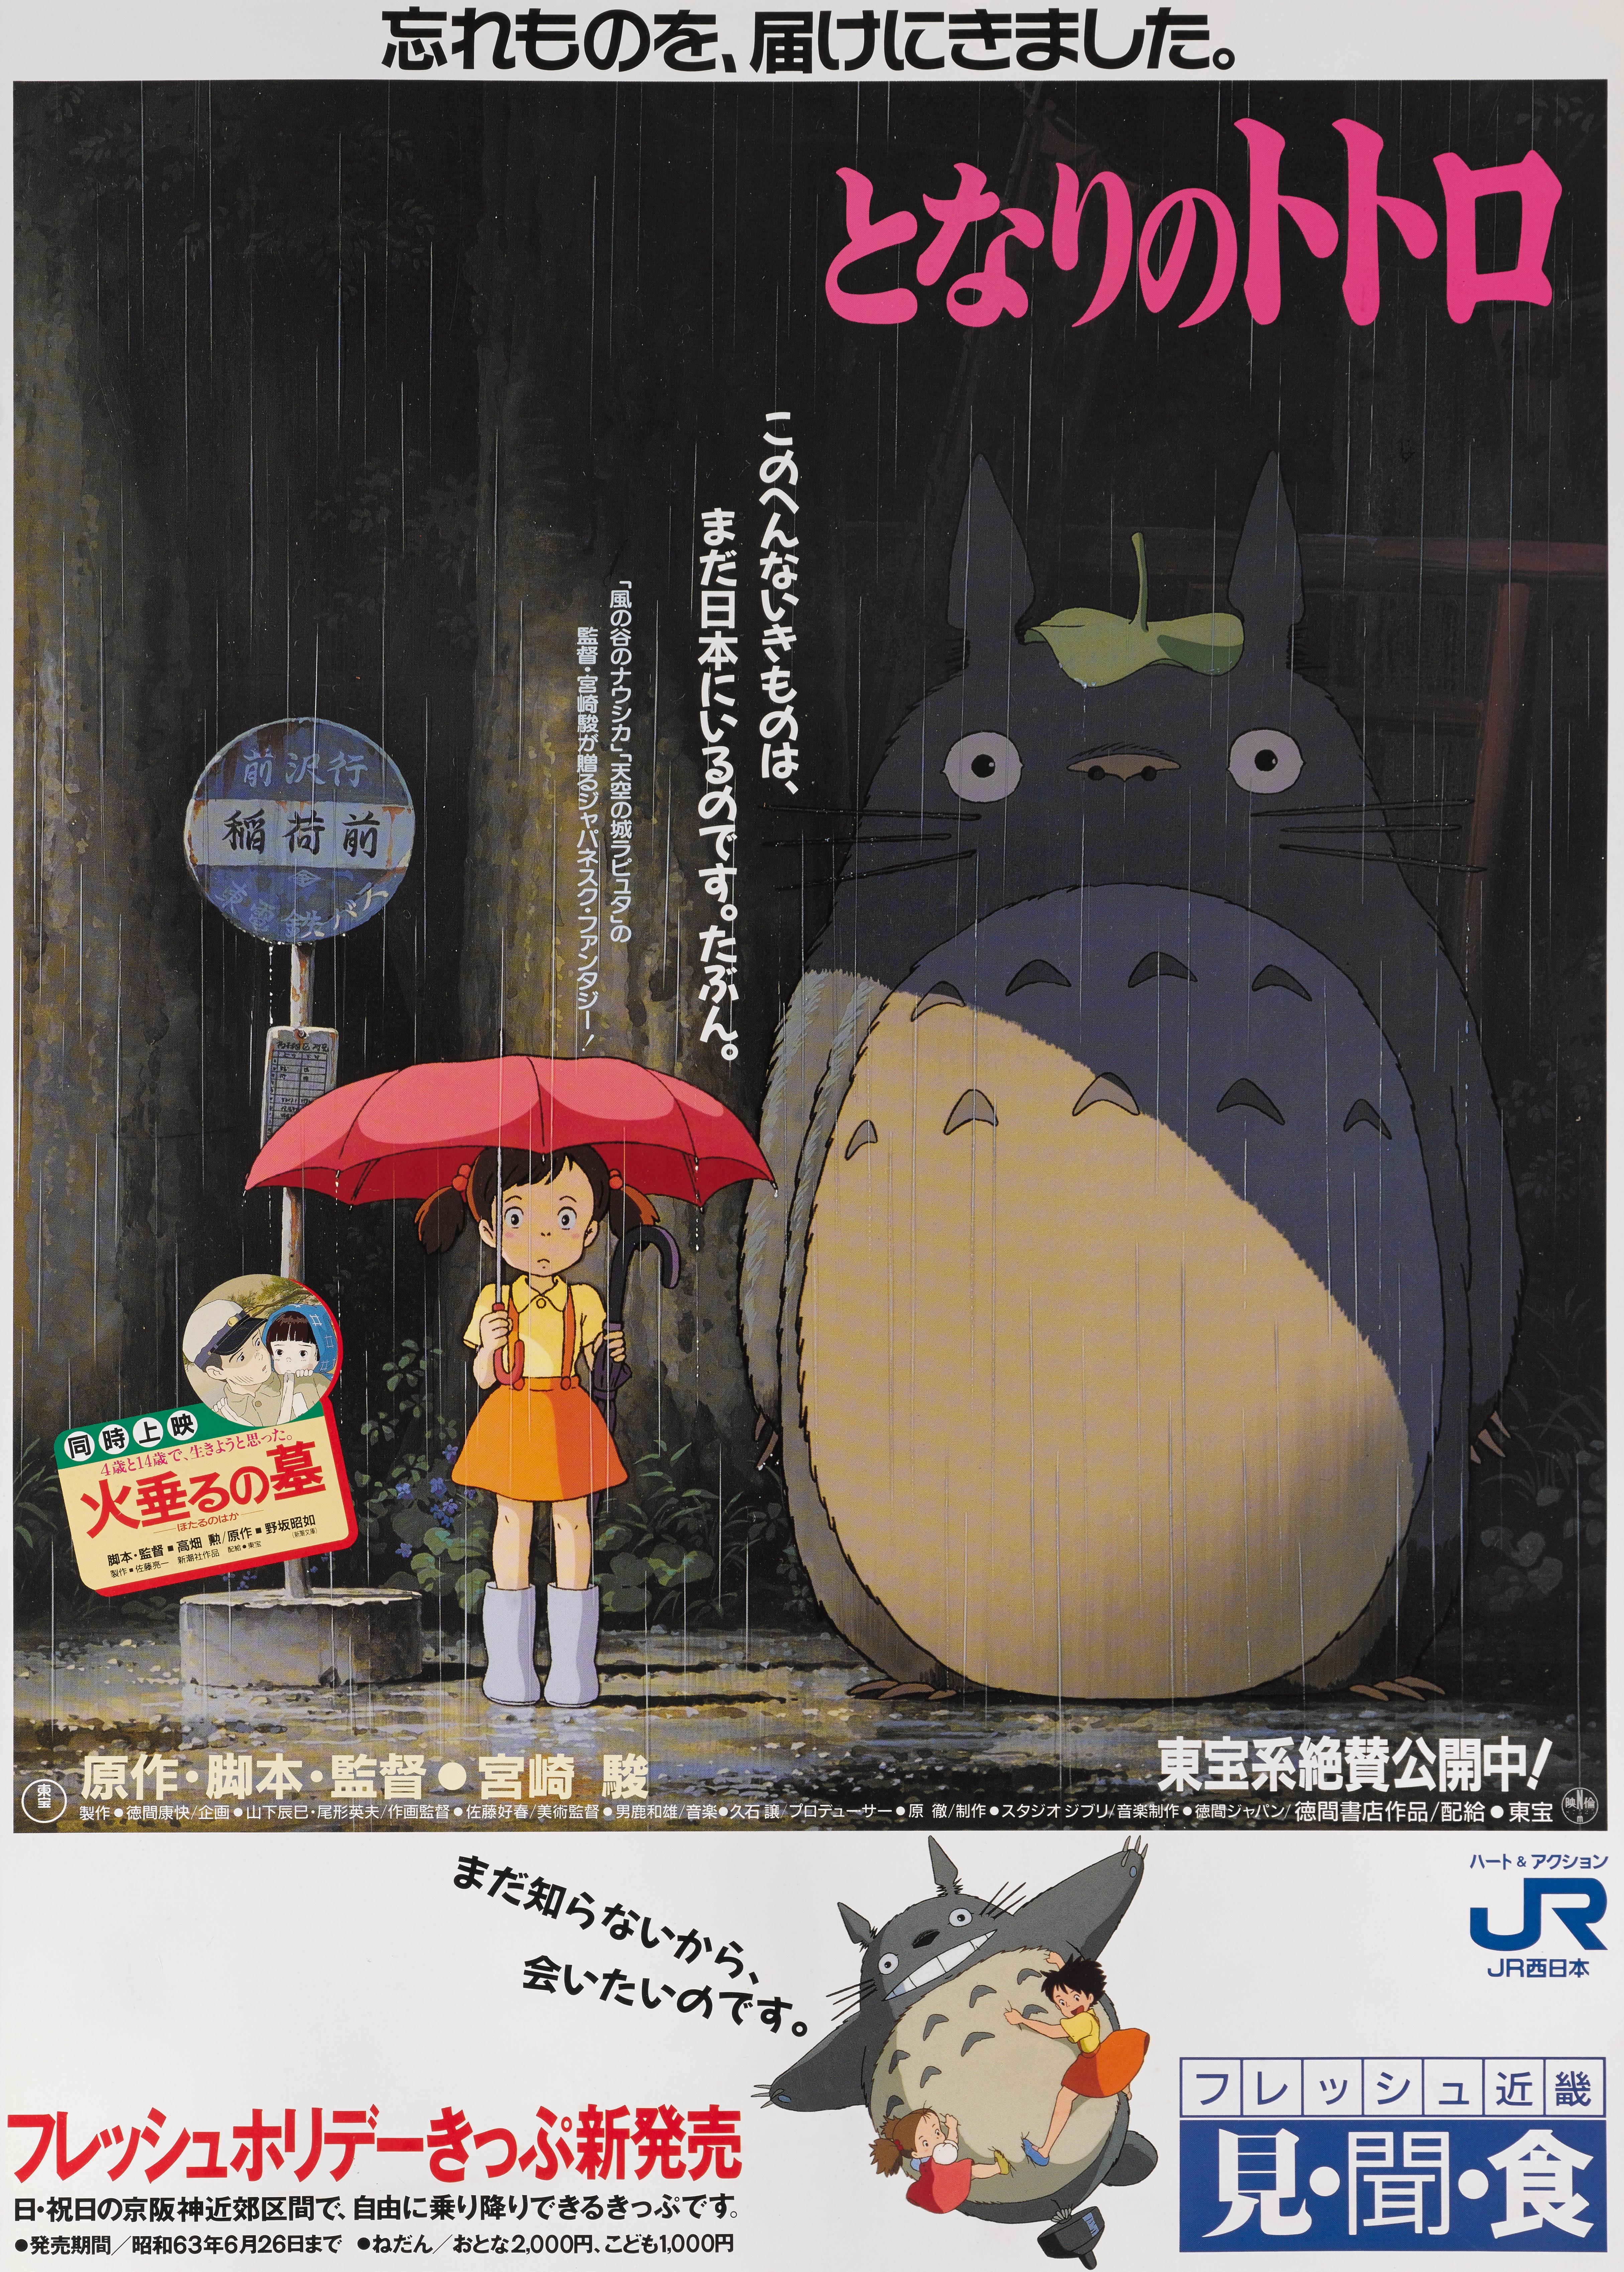 Original Japanese movie poster for the 2001 studio Ghibli animation directed by Hayao Miyazaki. This special style was created to tie in with JR line Japanese railroad company.
This poster is conservation linen backed and unfolded and would be sent